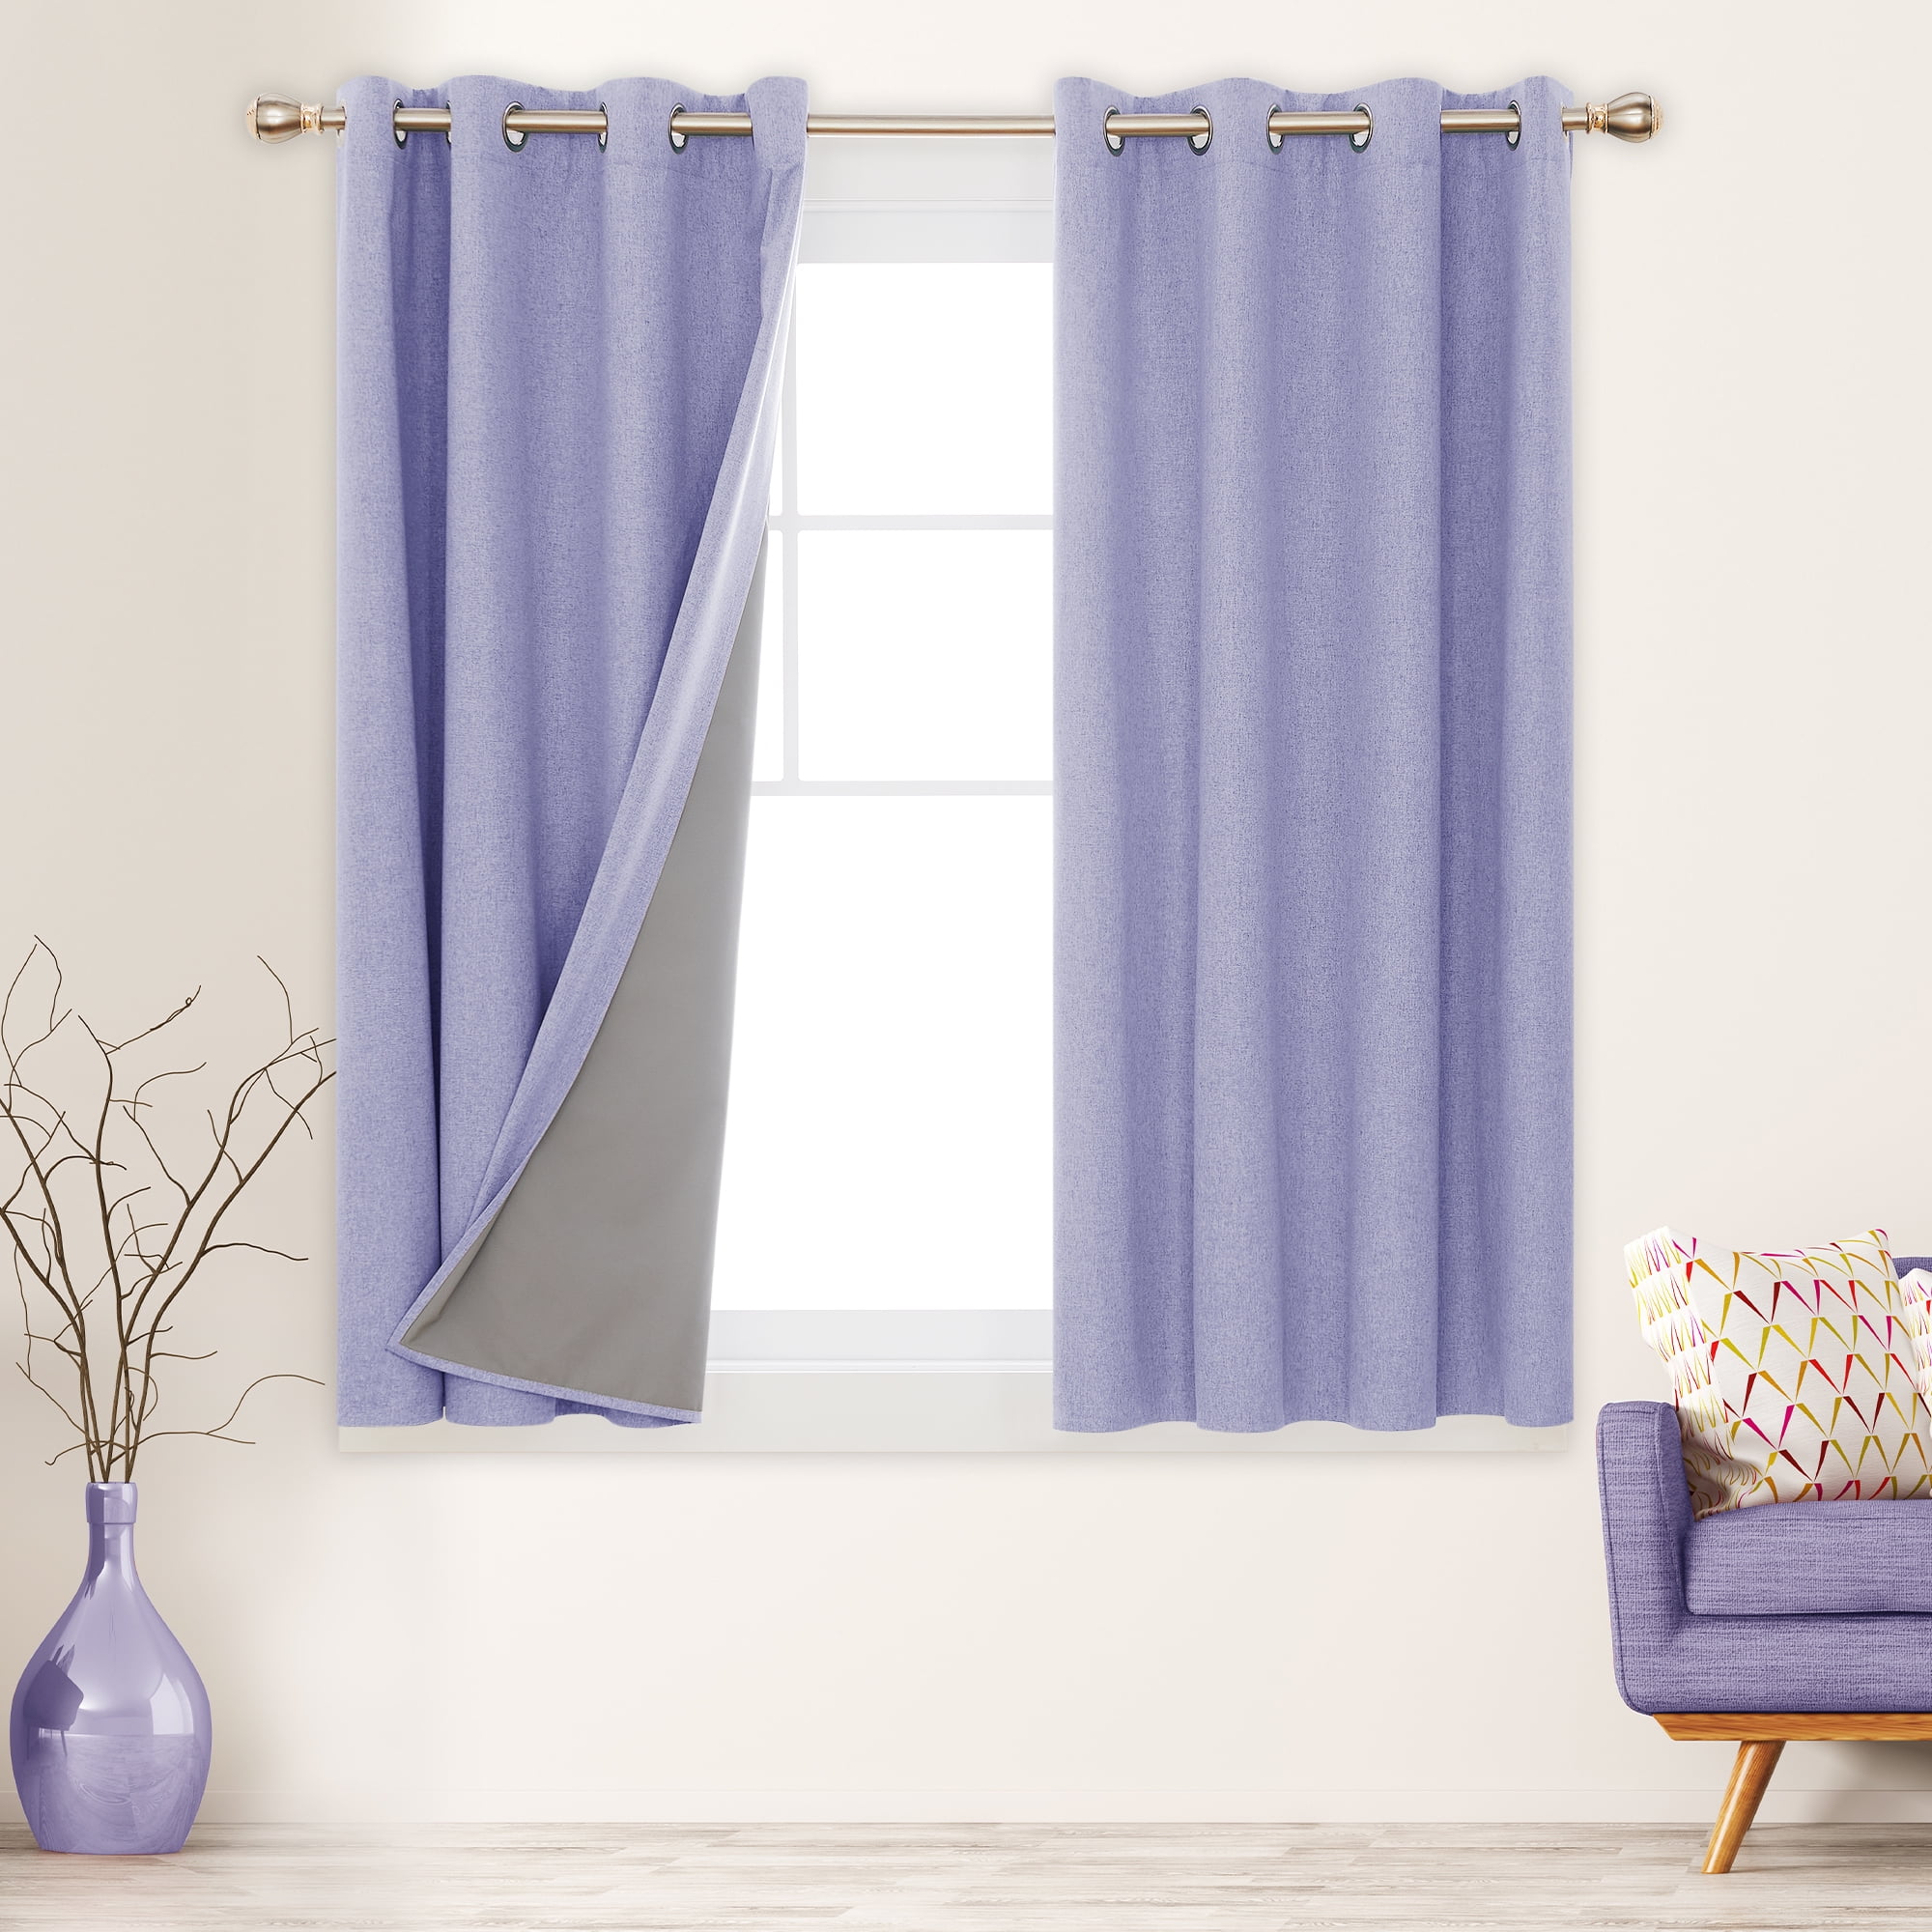 Cdiy Solid Short Curtains Kitchen Blackout Curtains For Living Room Bedroom Wind 